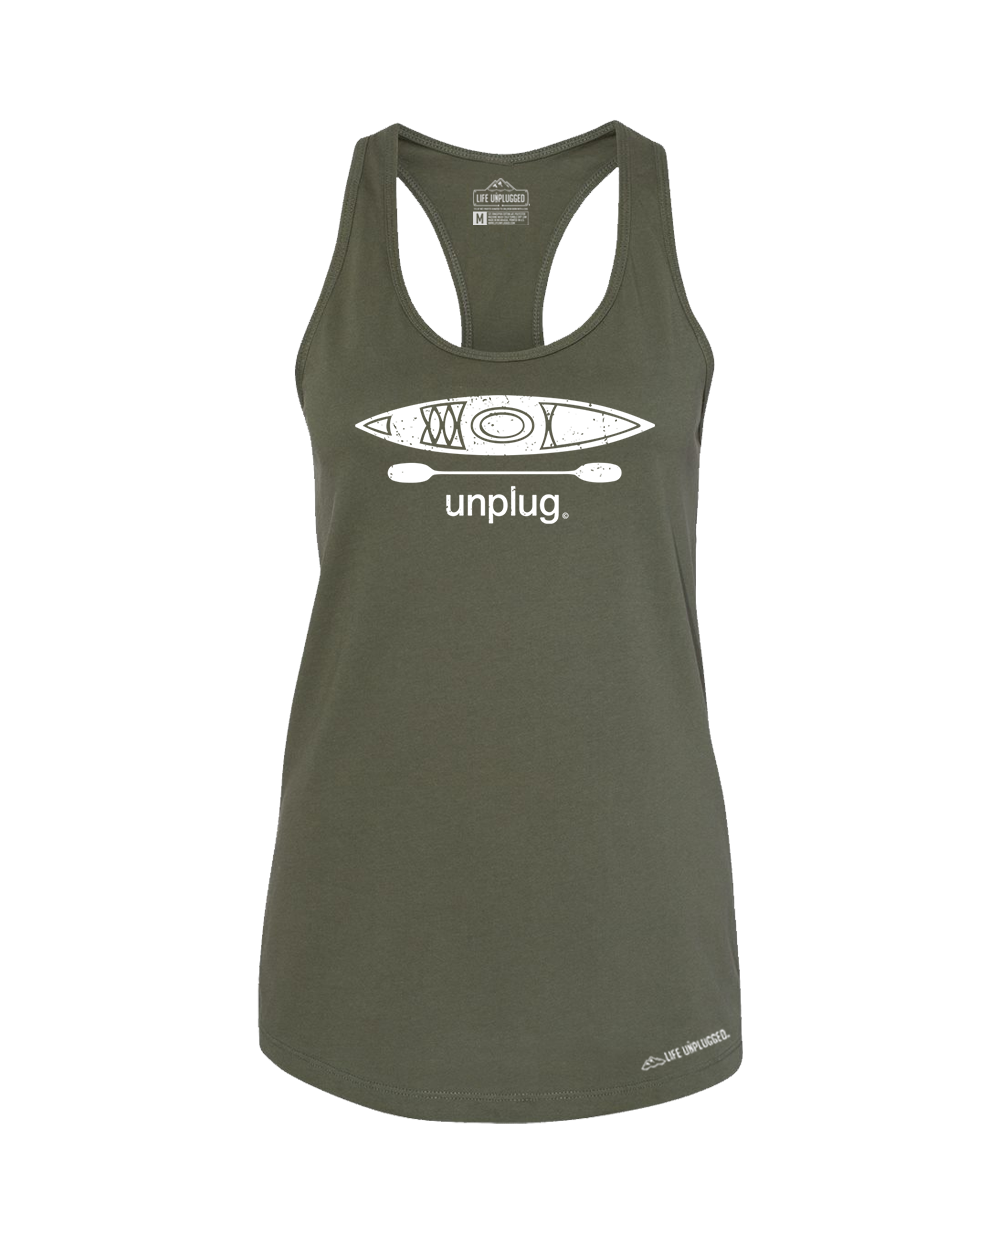 Kayak Premium Women's Relaxed Fit Racerback Tank Top - Life Unplugged